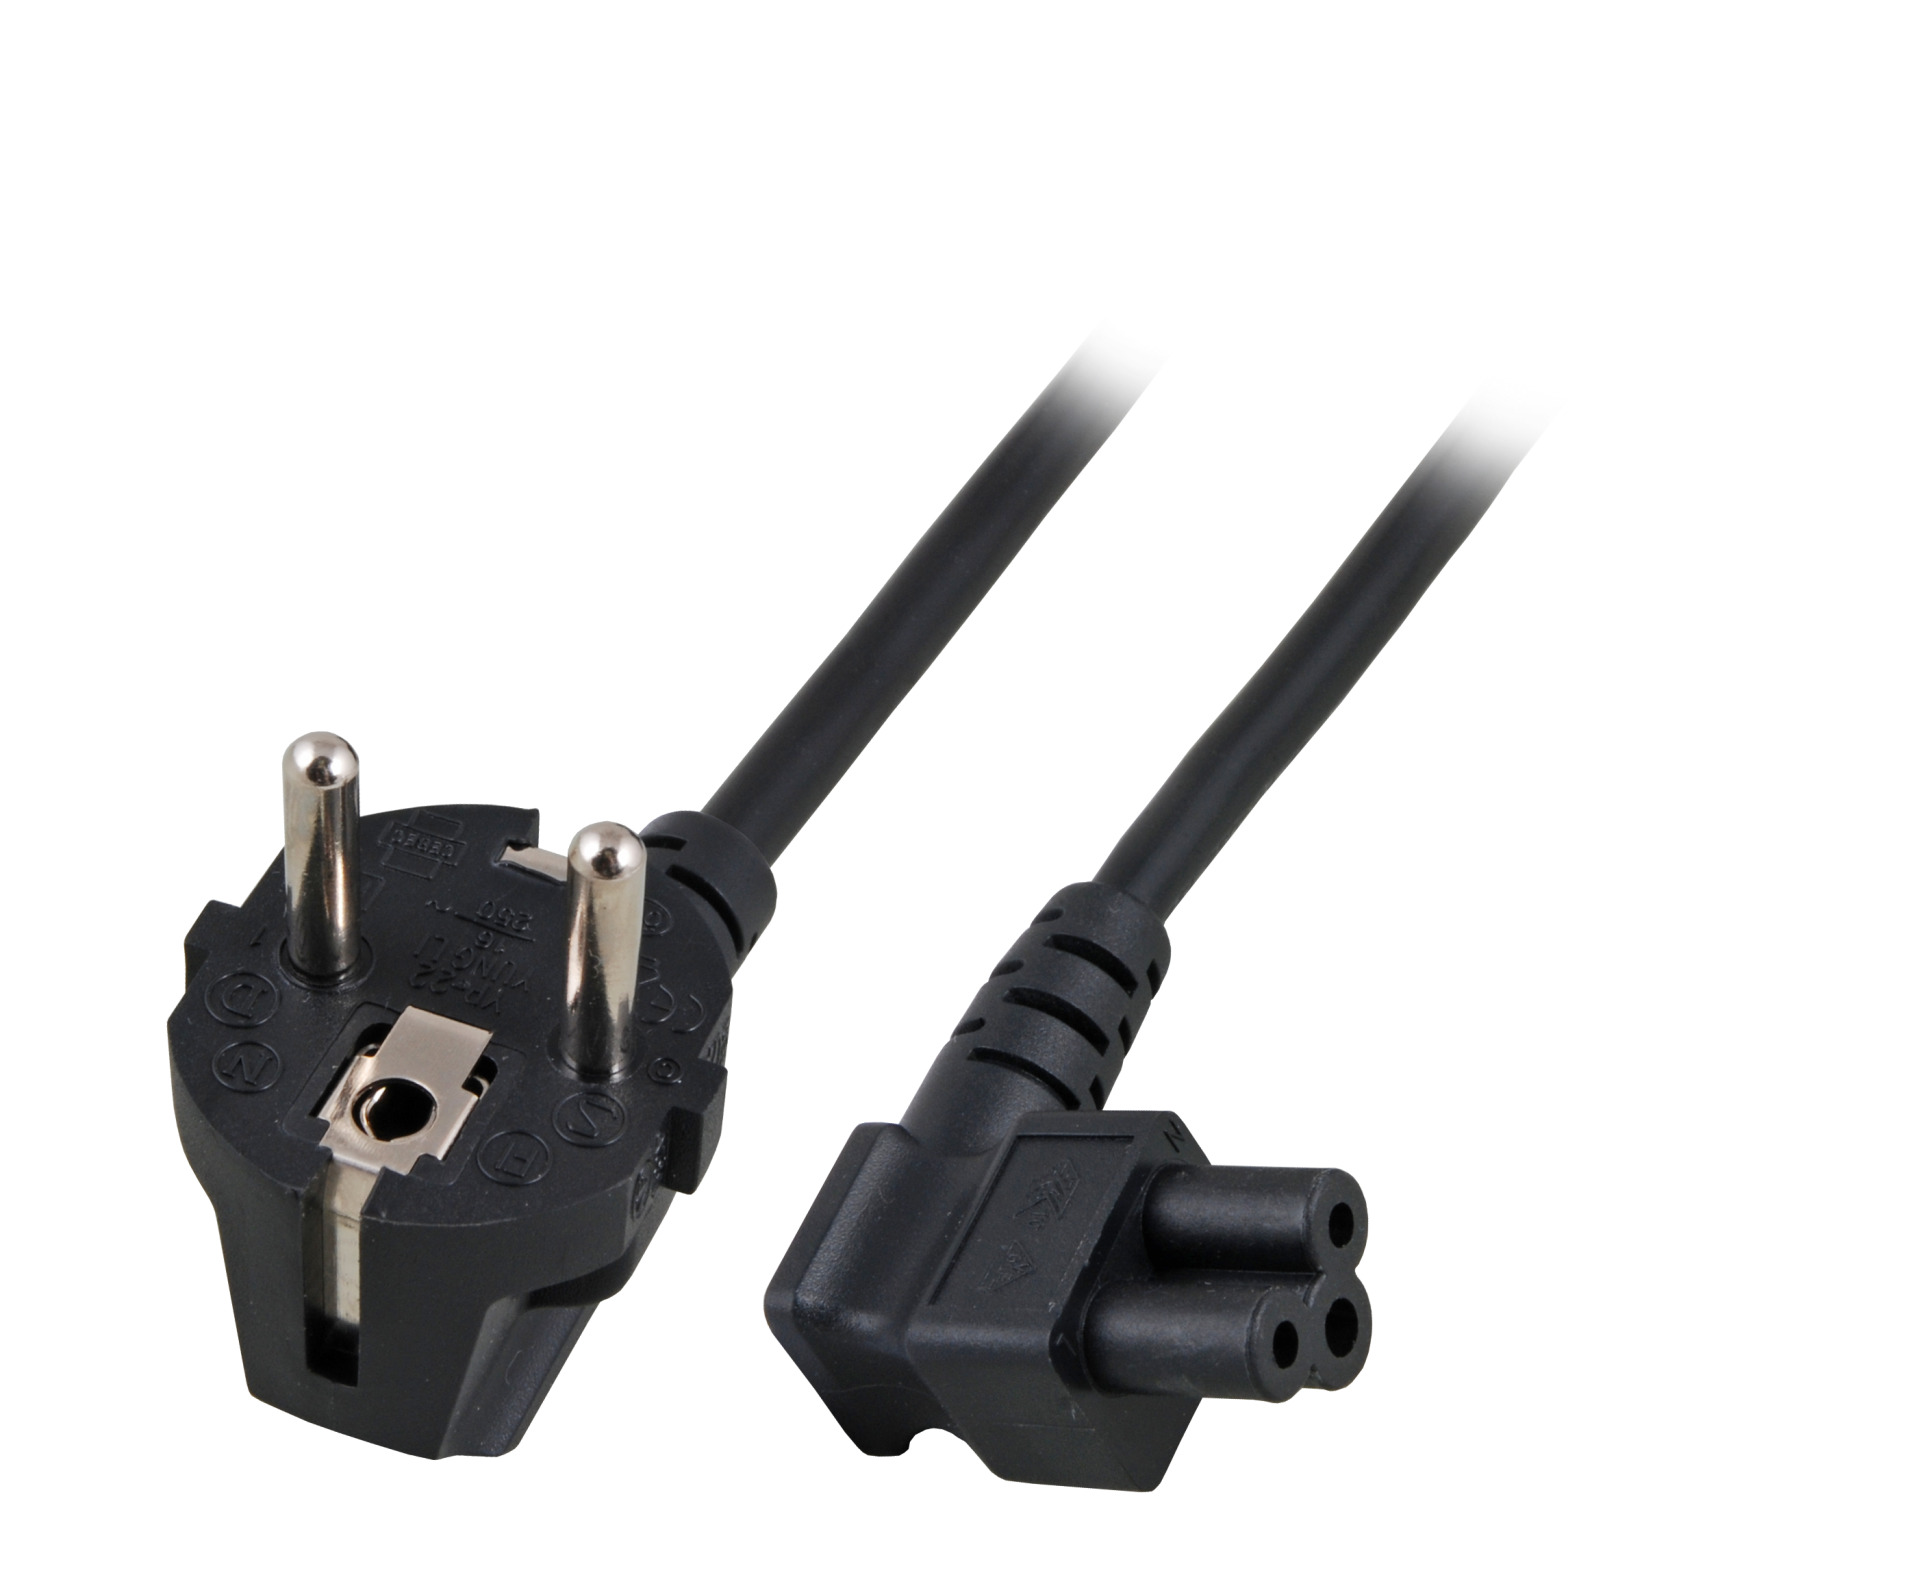 Power Cable CEE7/7 90° - C5 90°, Black, 1.8 m, 3 x 0.75 mm²